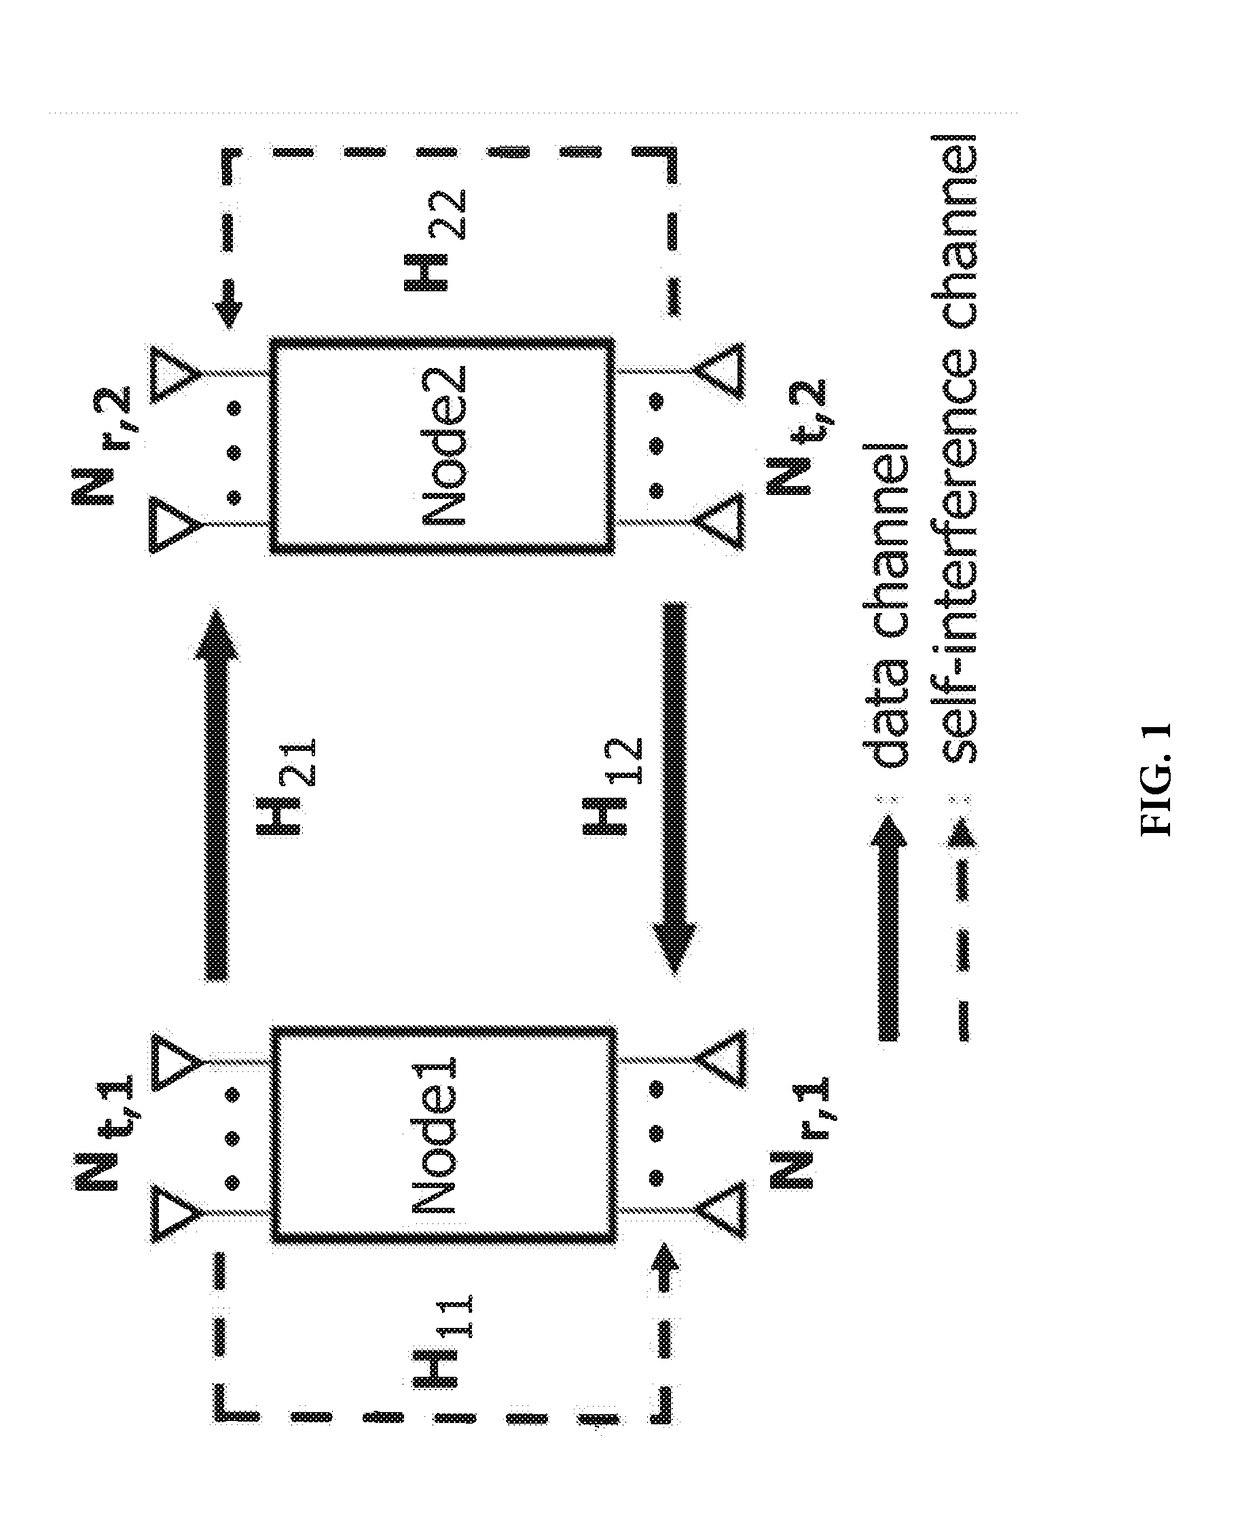 Method for selecting antennas in full-duplex MIMO system